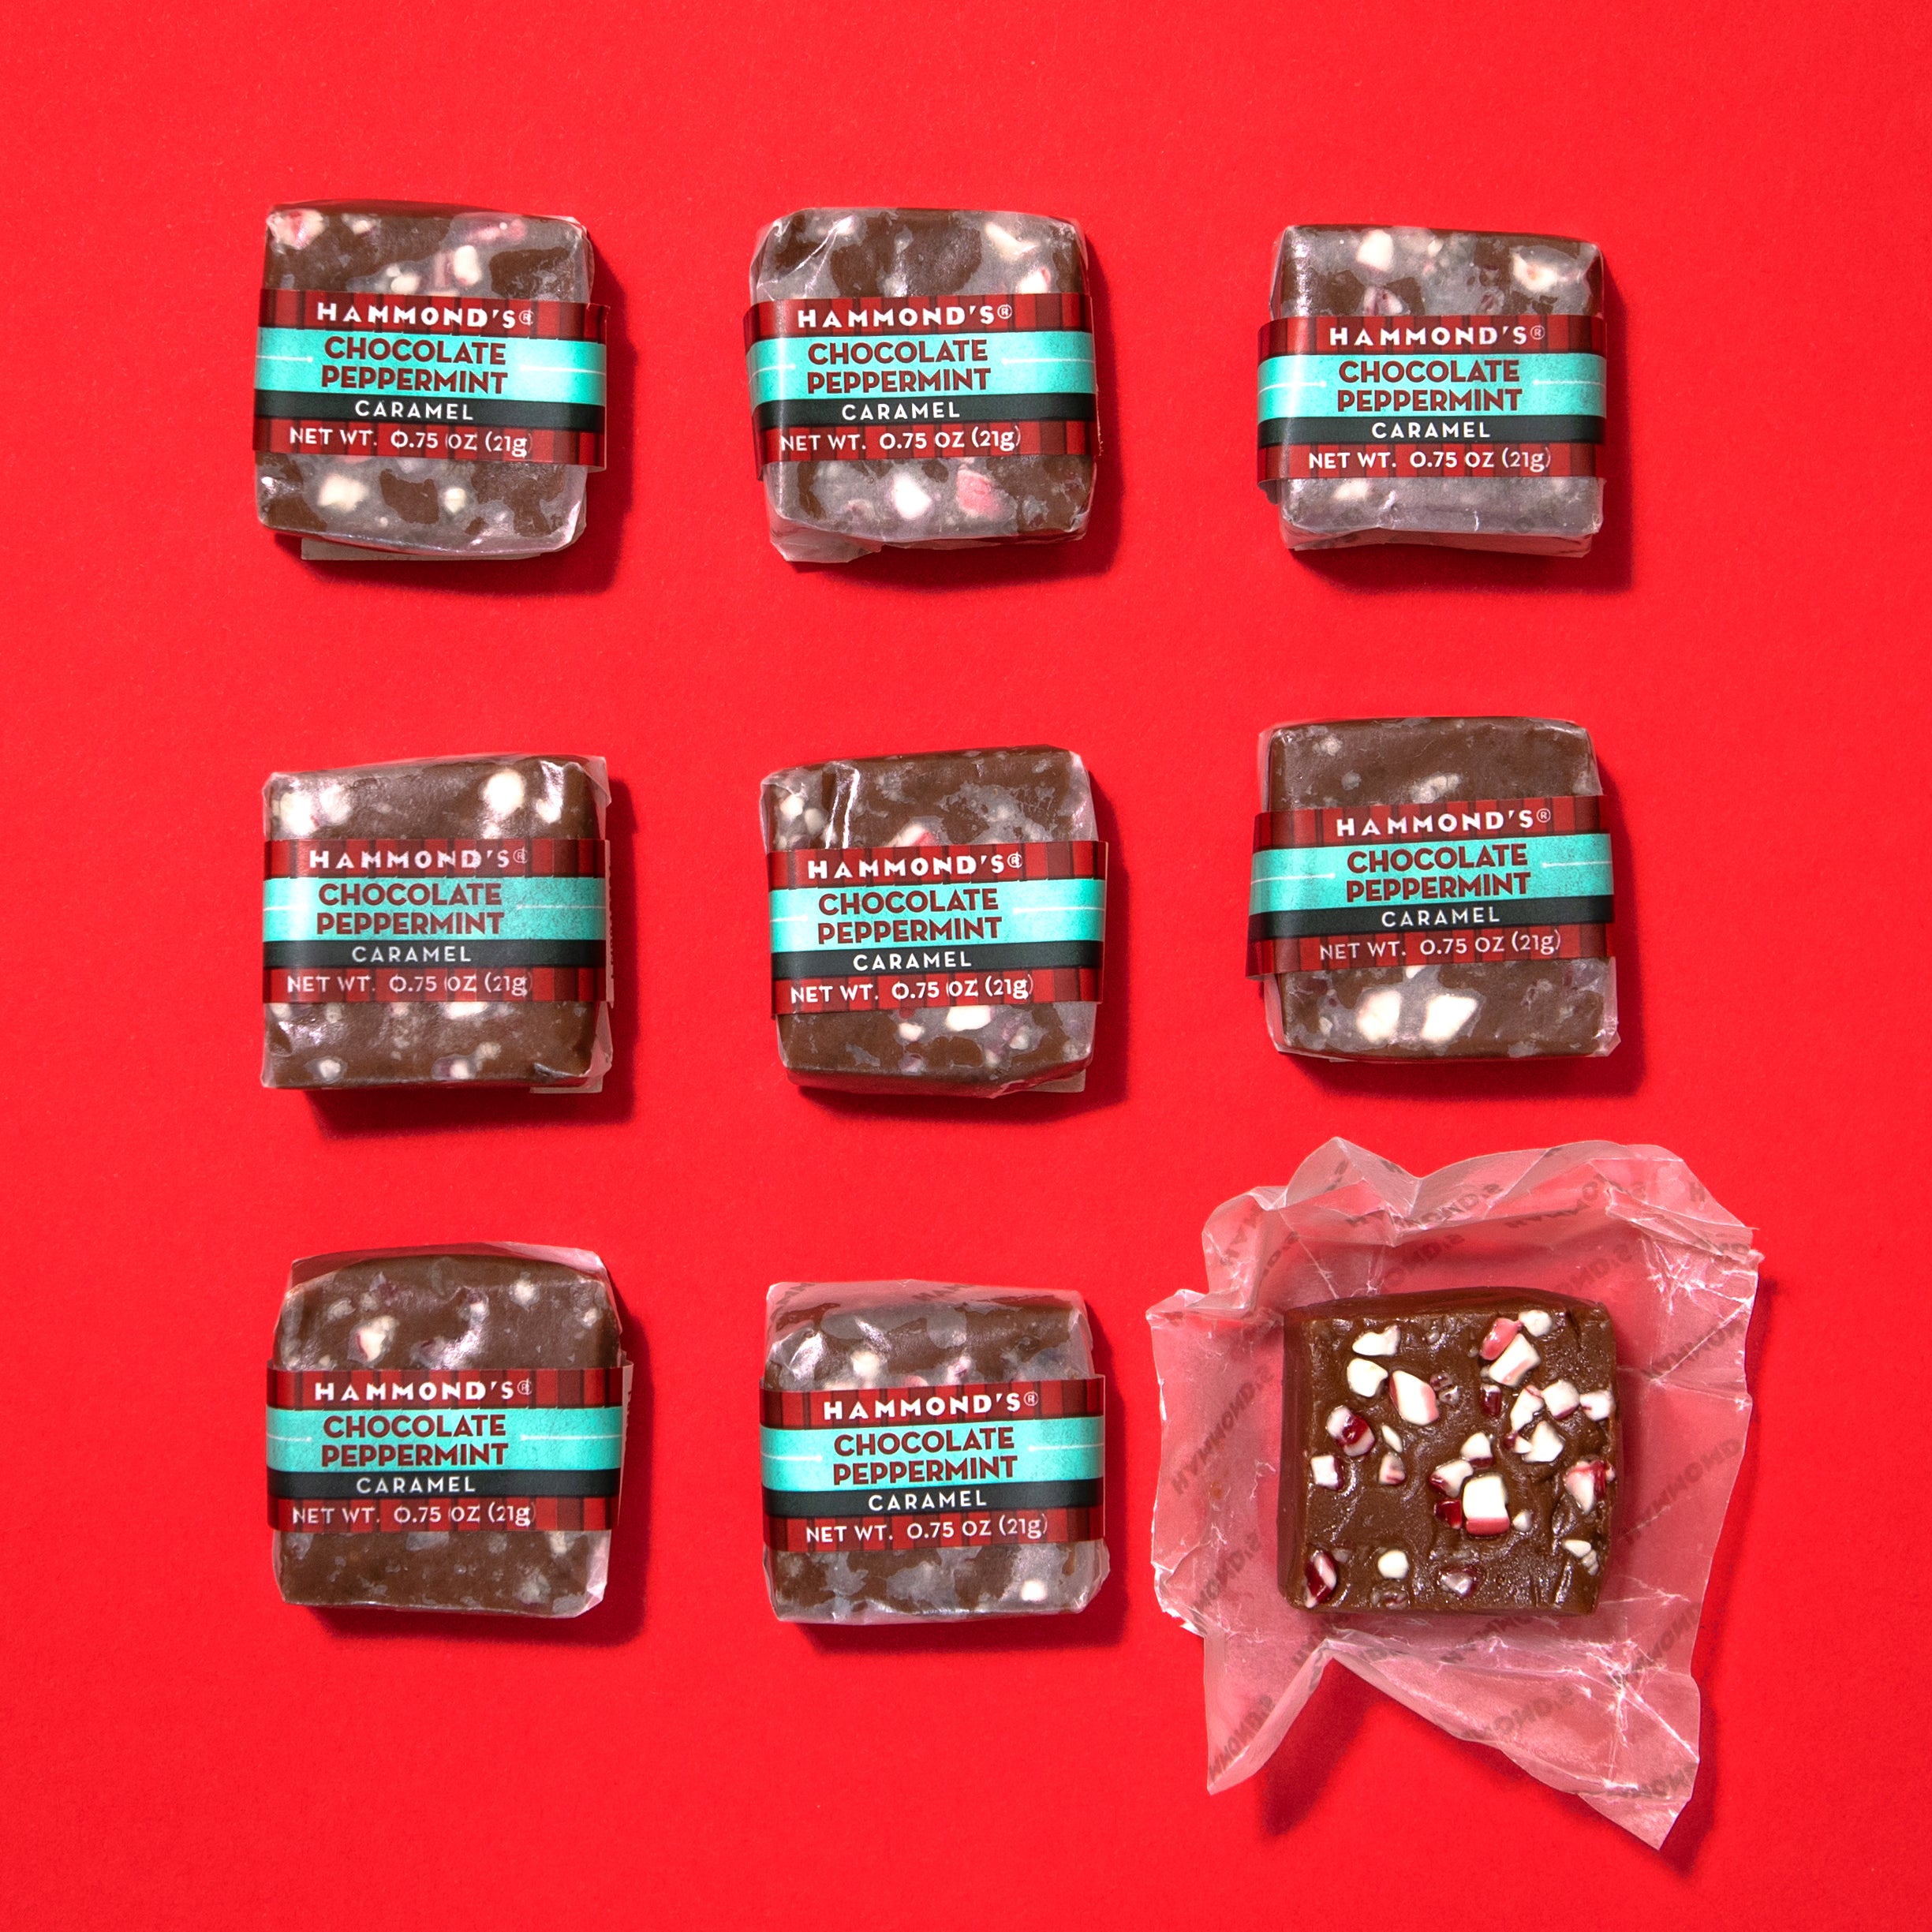 Chocolate Peppermint Caramels Glamour Shot